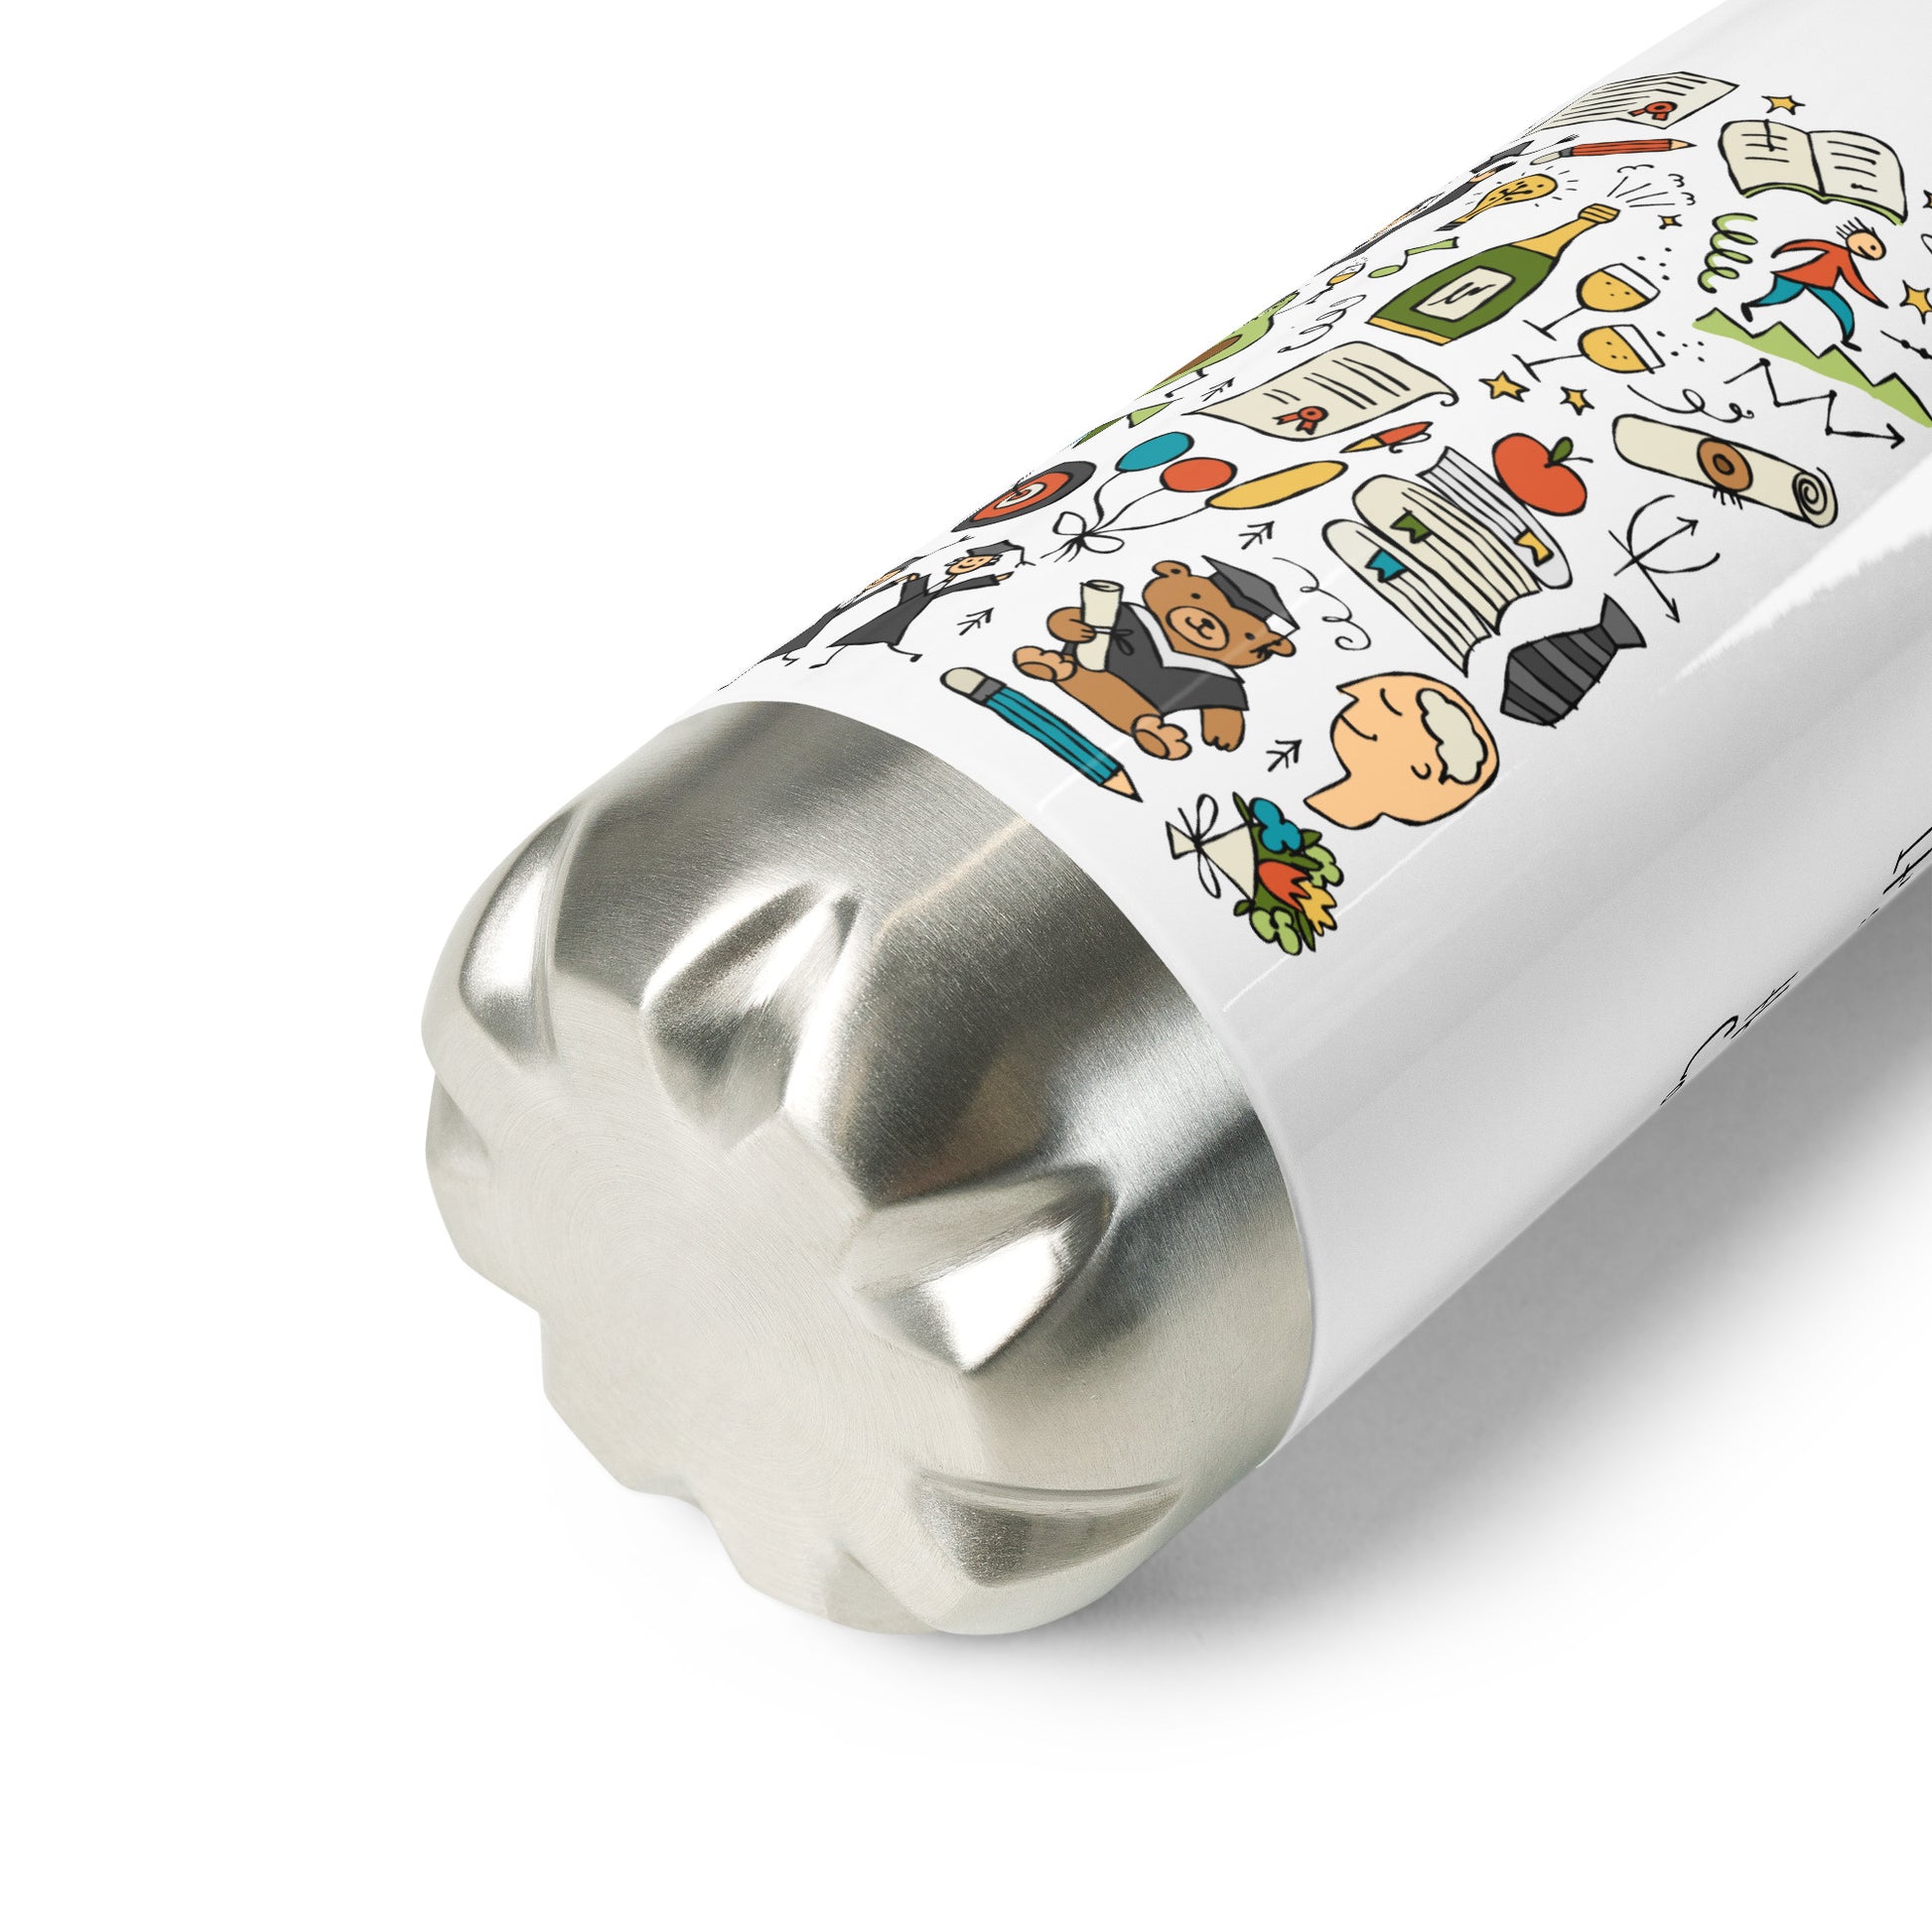 Personalised Graduation Stainless Steel Water Bottle with Funny Designer Print. Close Up